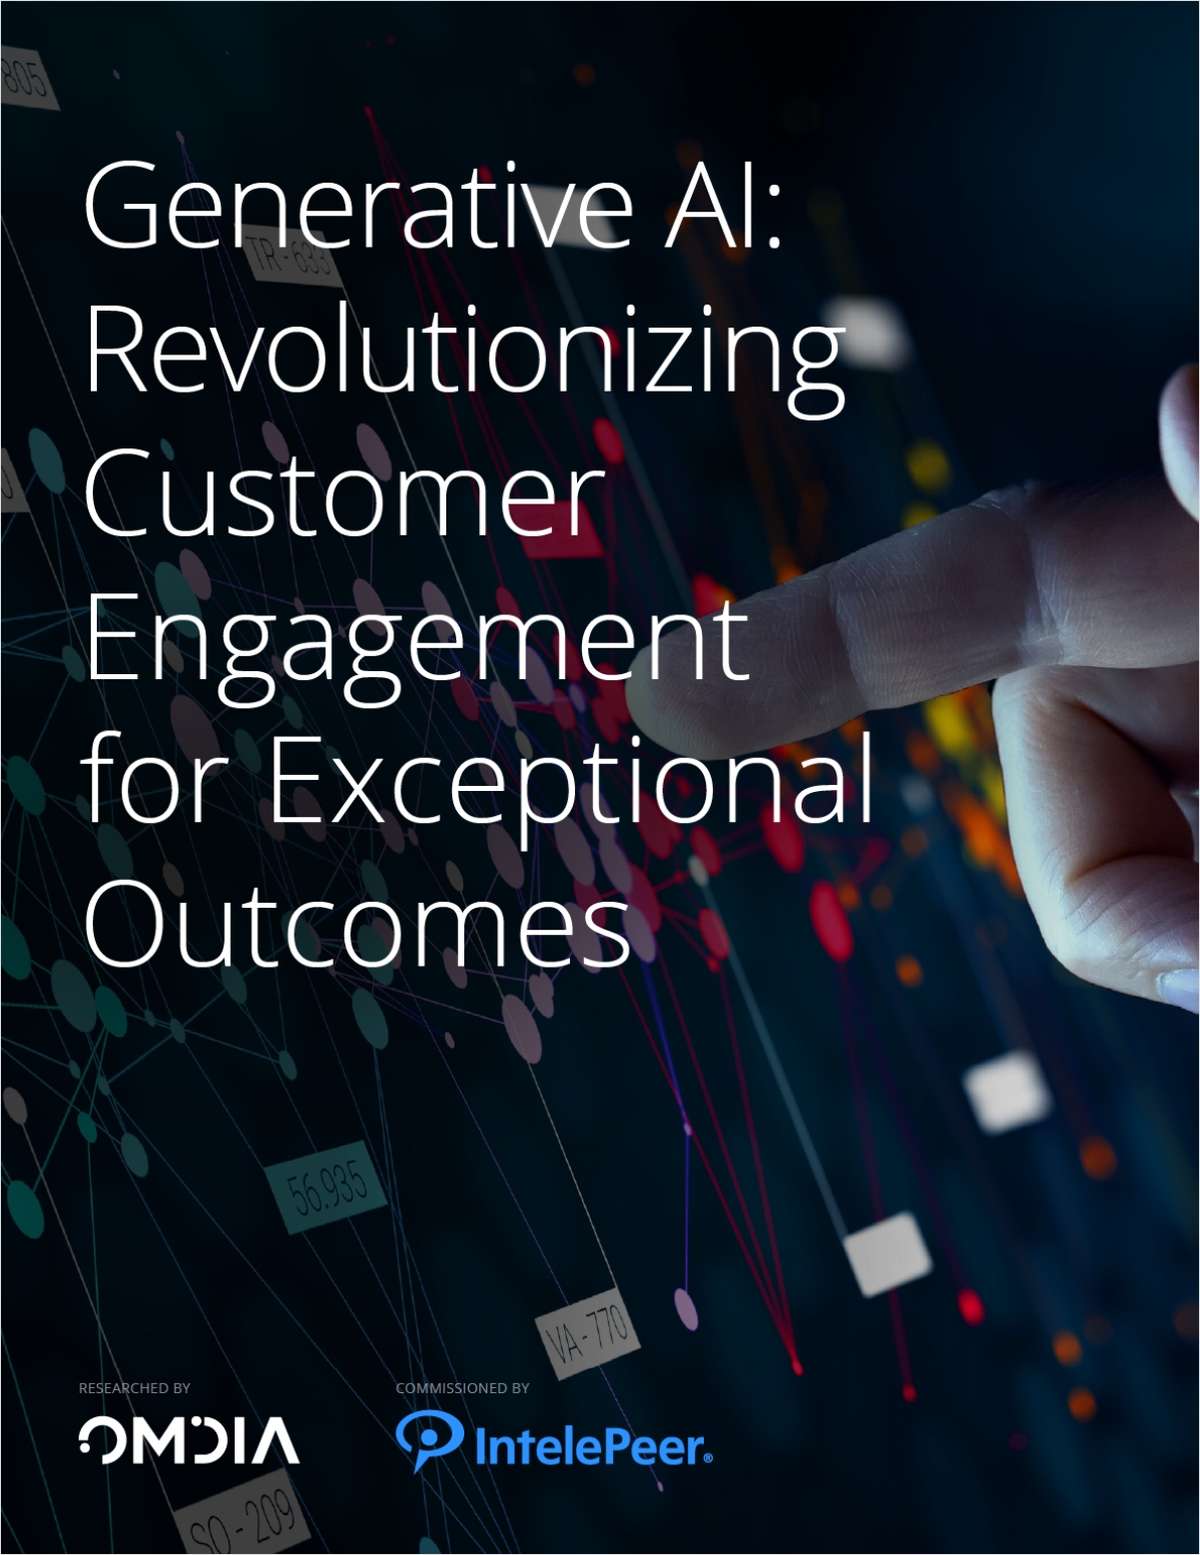 Generative AI: Revolutionizing Customer Engagement for Exceptional Outcomes